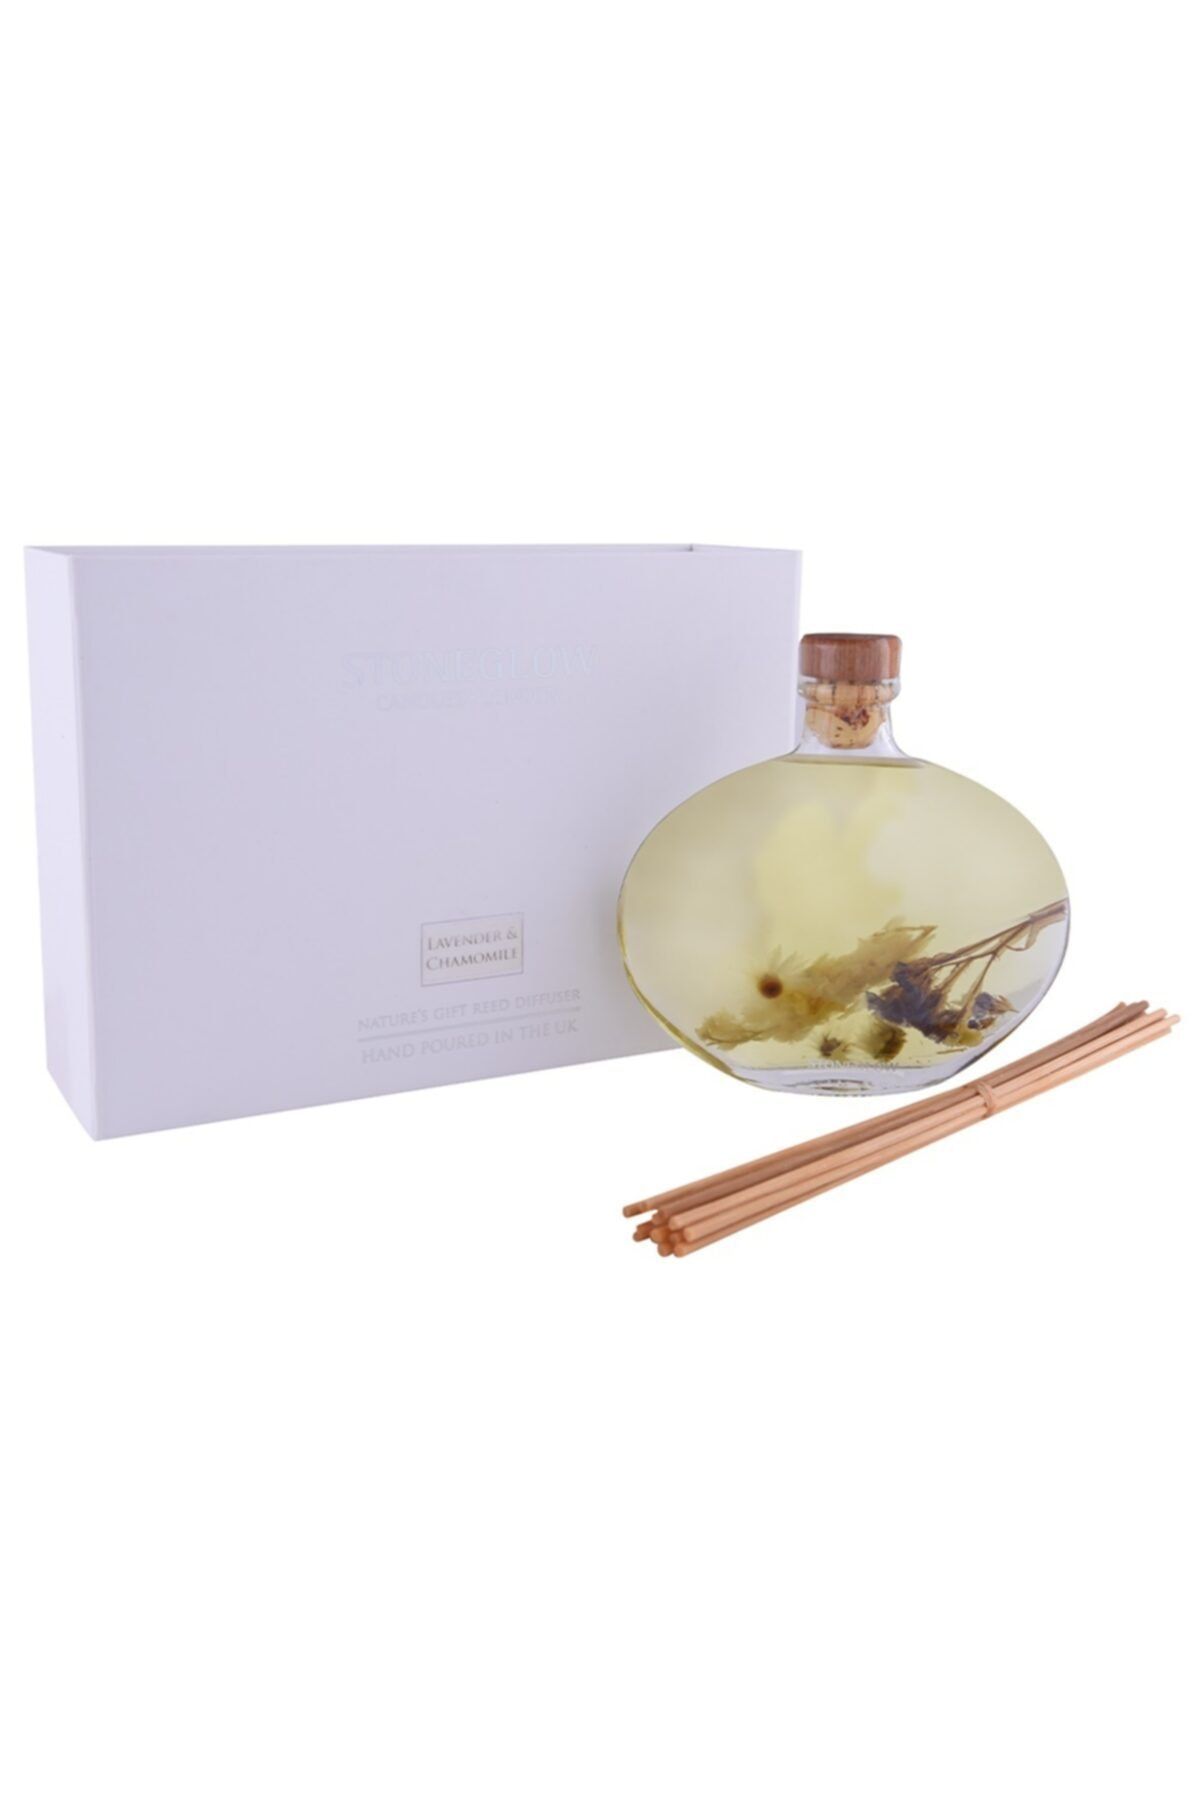 Lucky Art Natures Gift Lavender&chamomile Reed Diffuser 200 ml